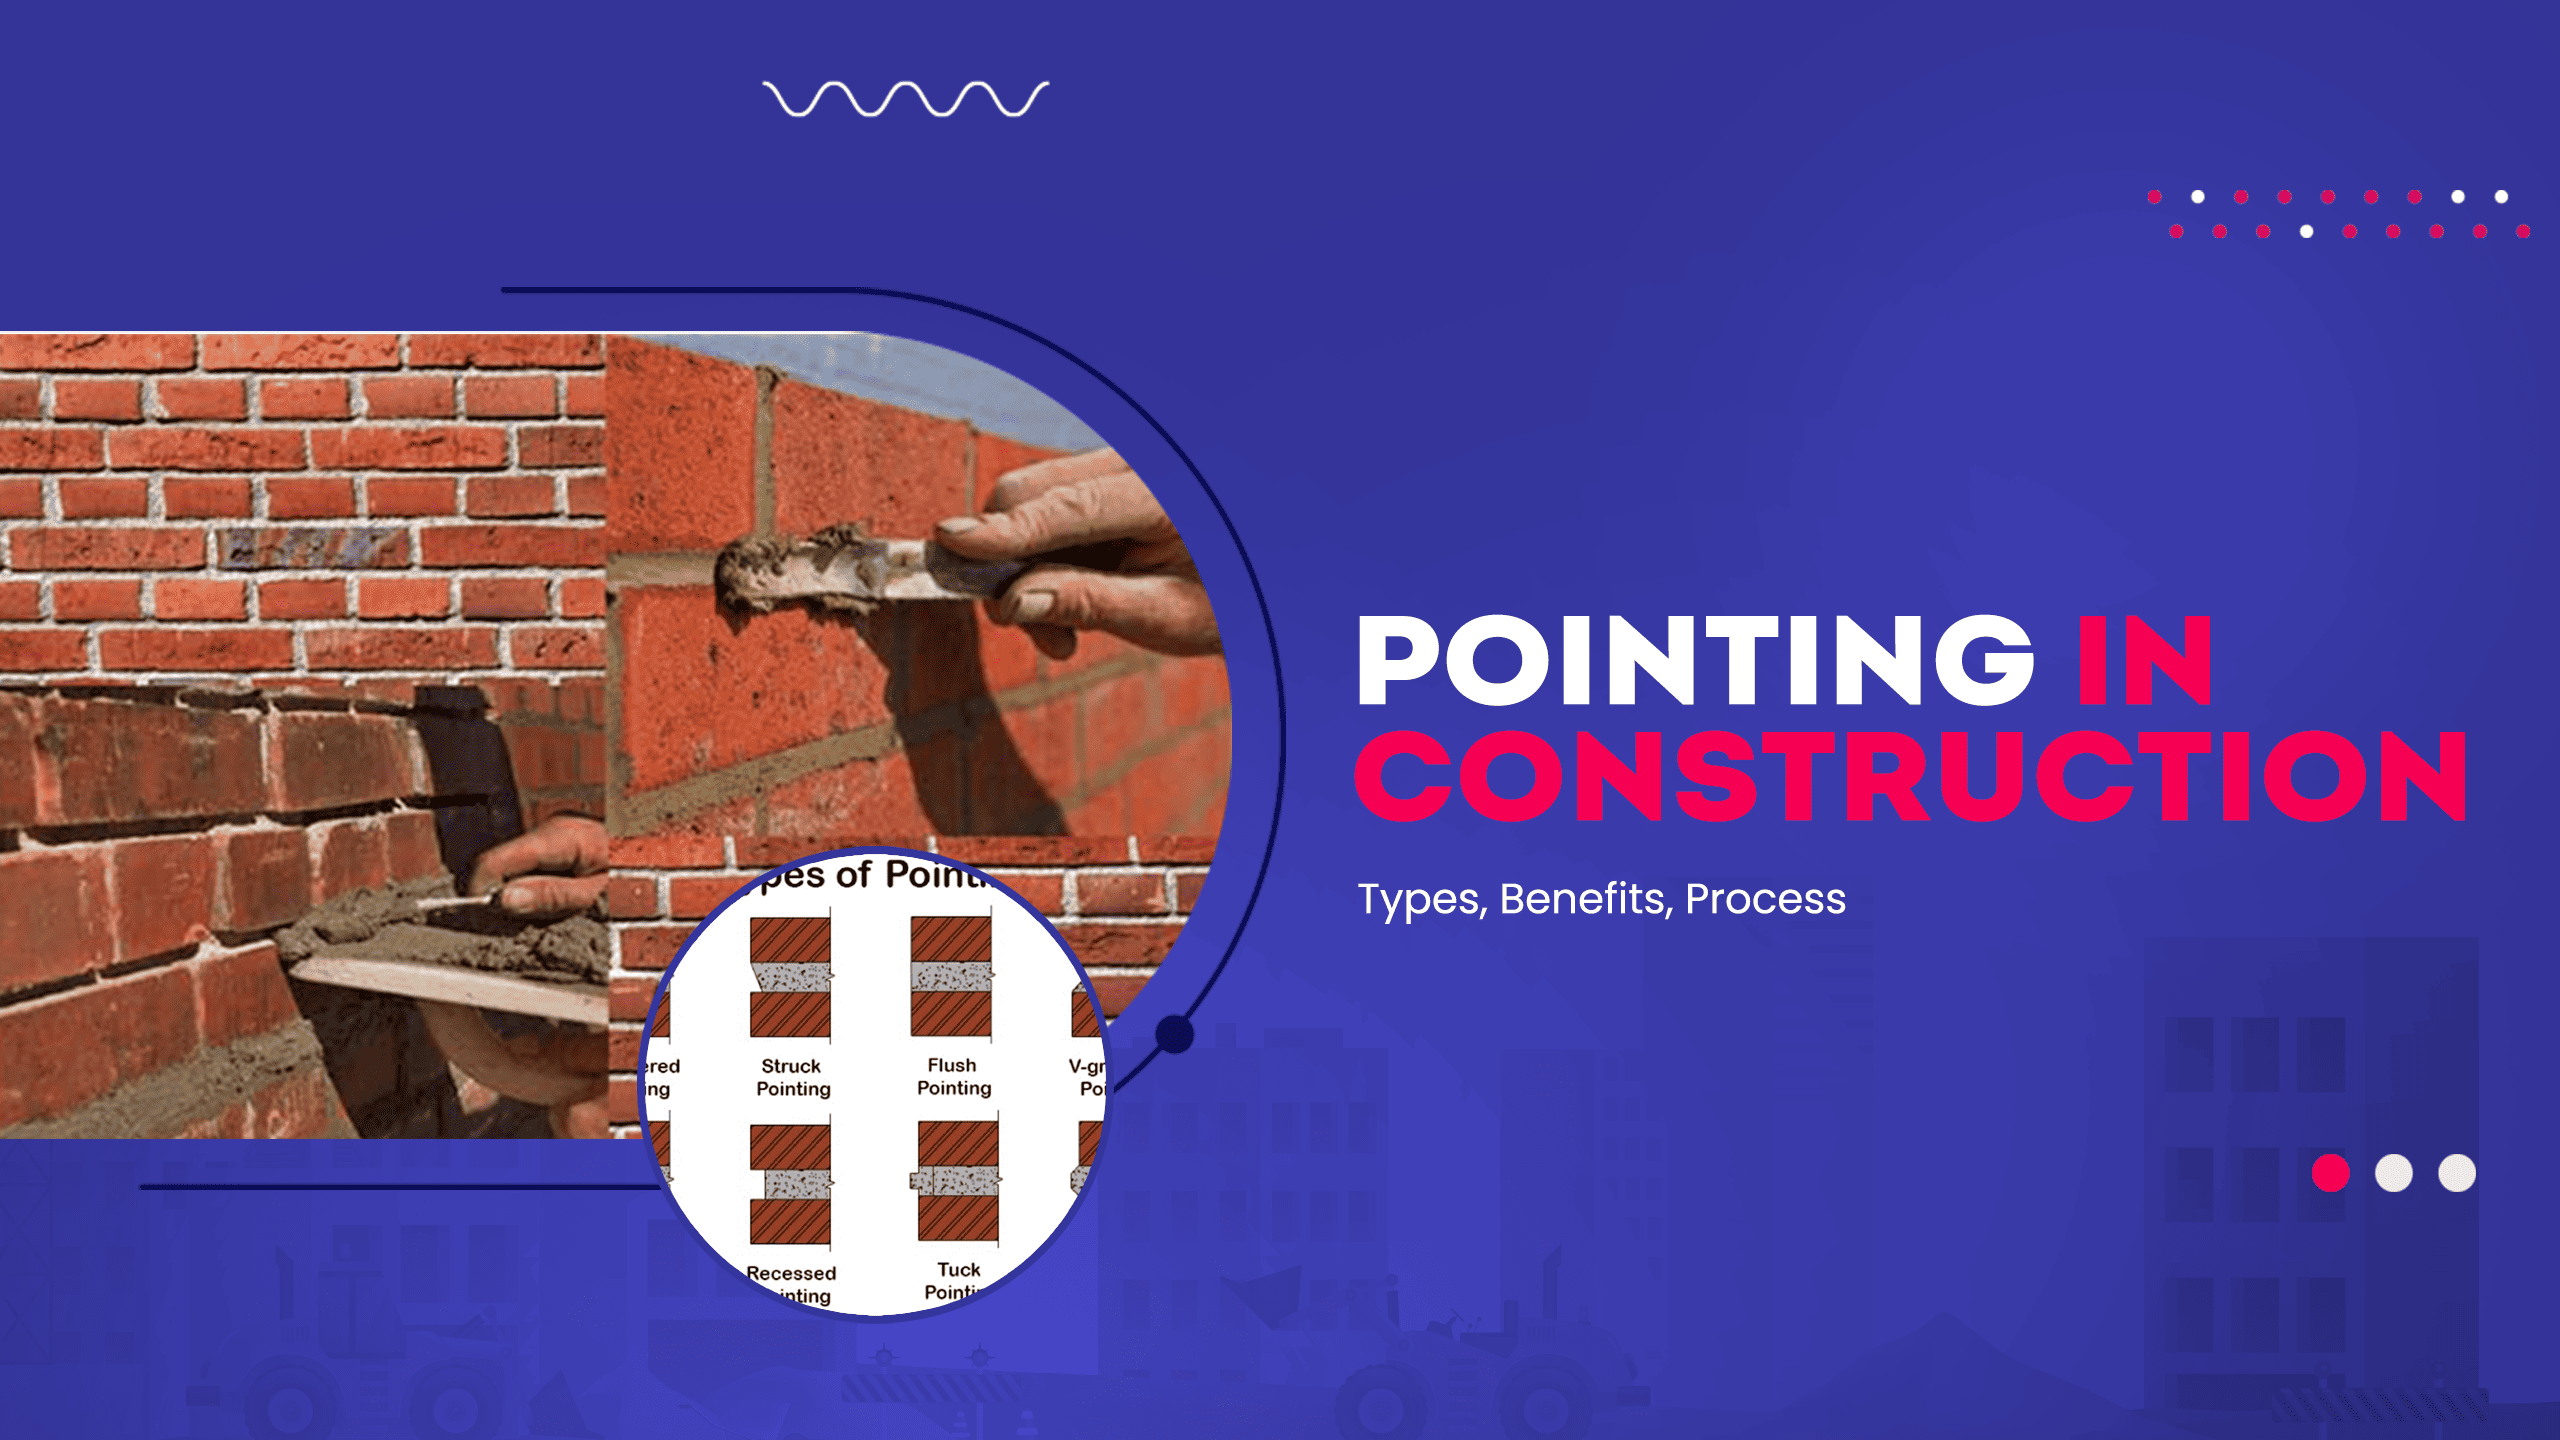 Image showing pictures of different types of pointing used in construction. The image has the following heading text - Pointing in construction